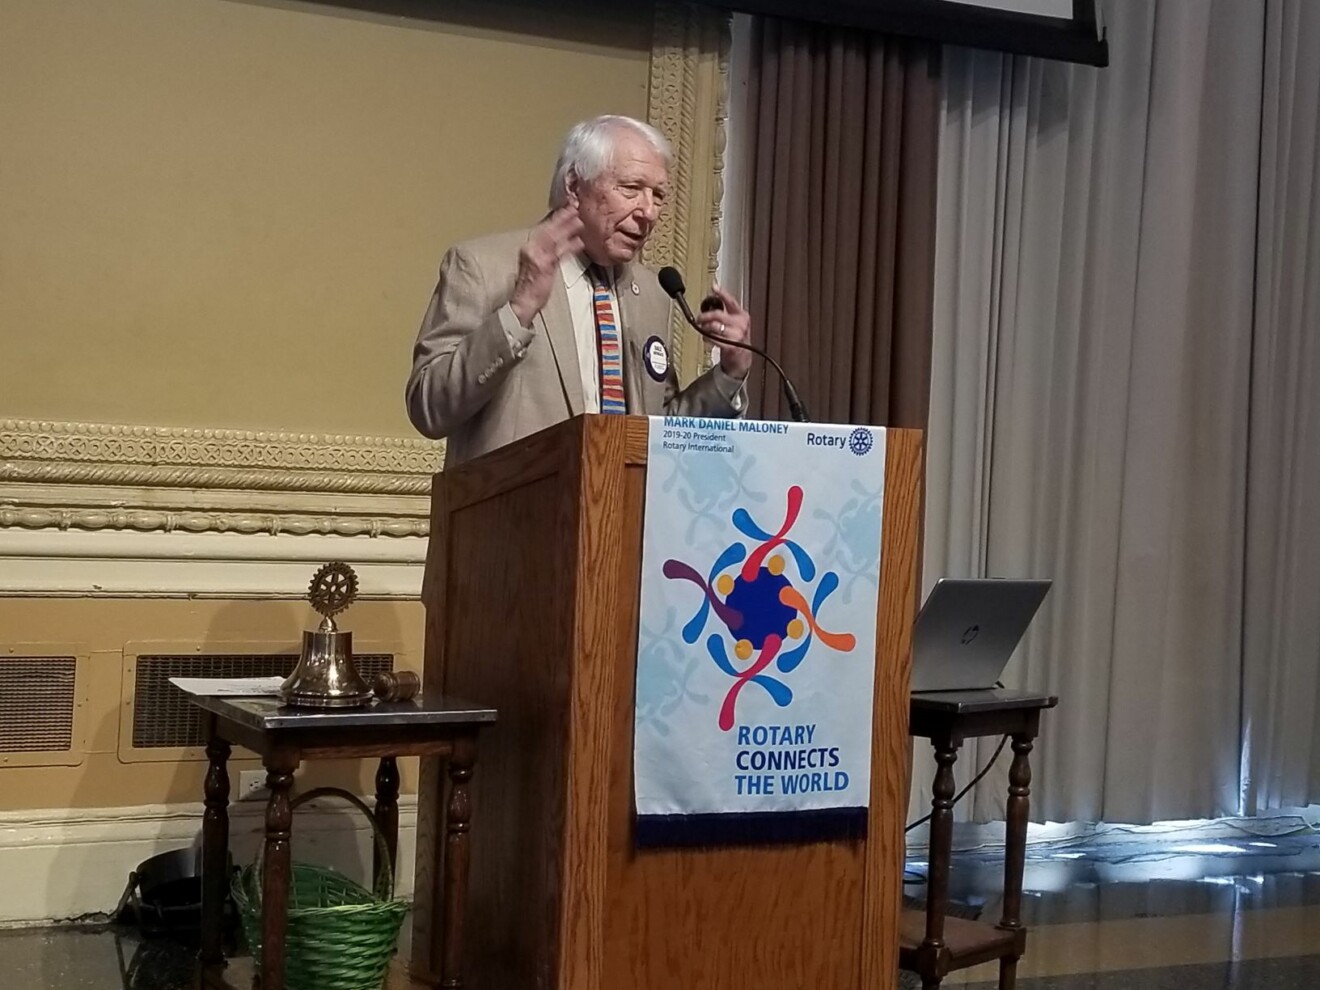 Dale Ruthsatz speaking at St. Louis Rotary Club of 2-16-23